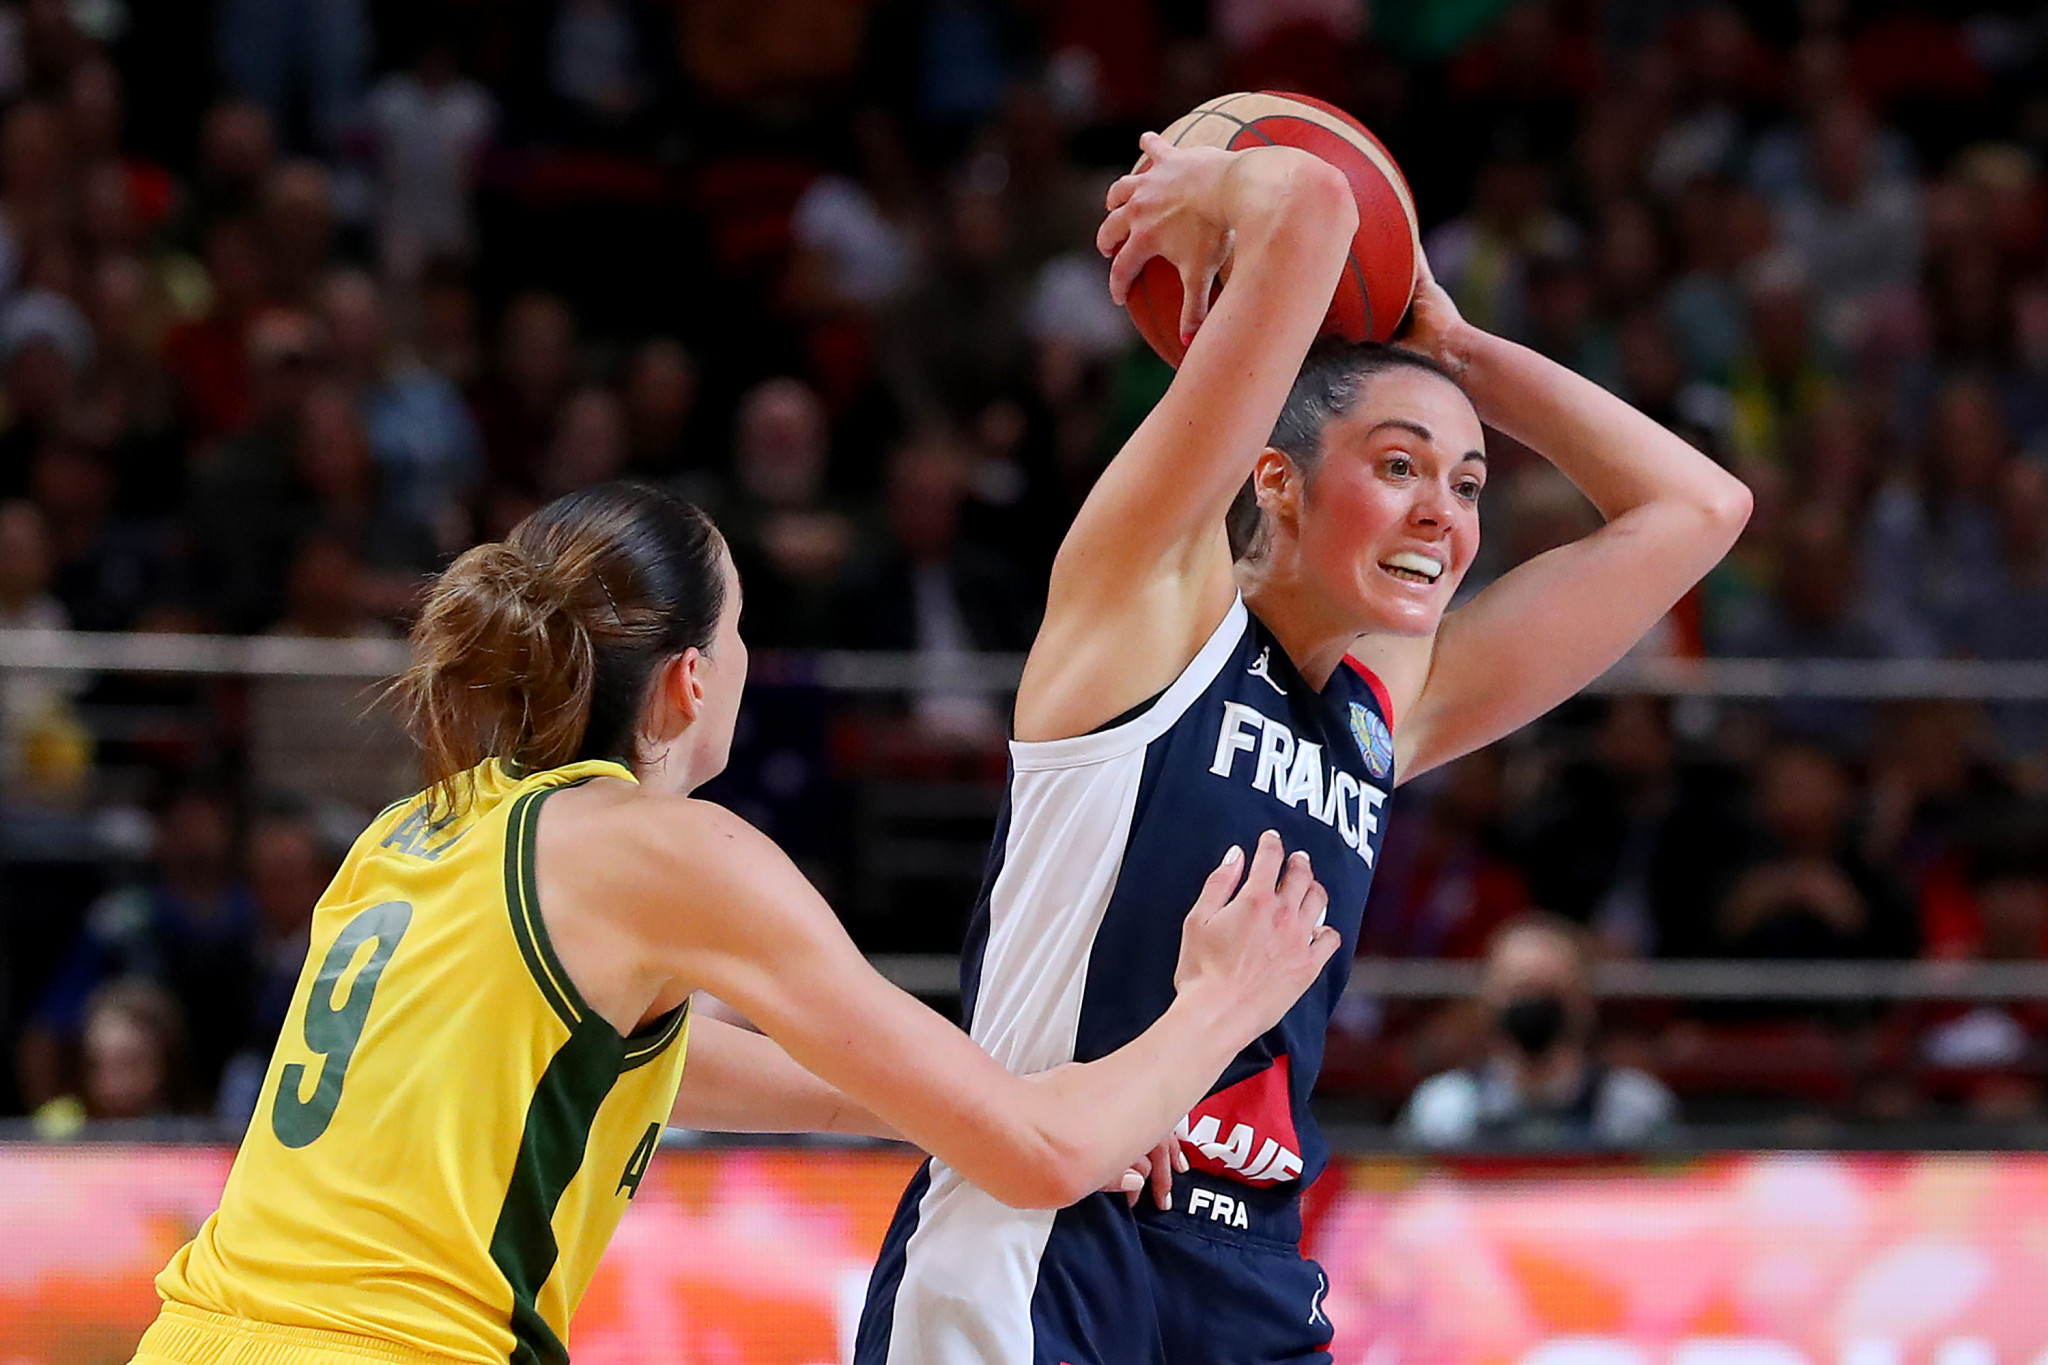 France stunned Australia as they spoiled the opening night for the hosts at the Women's Basketball World Cup in Sydney ©Getty Images